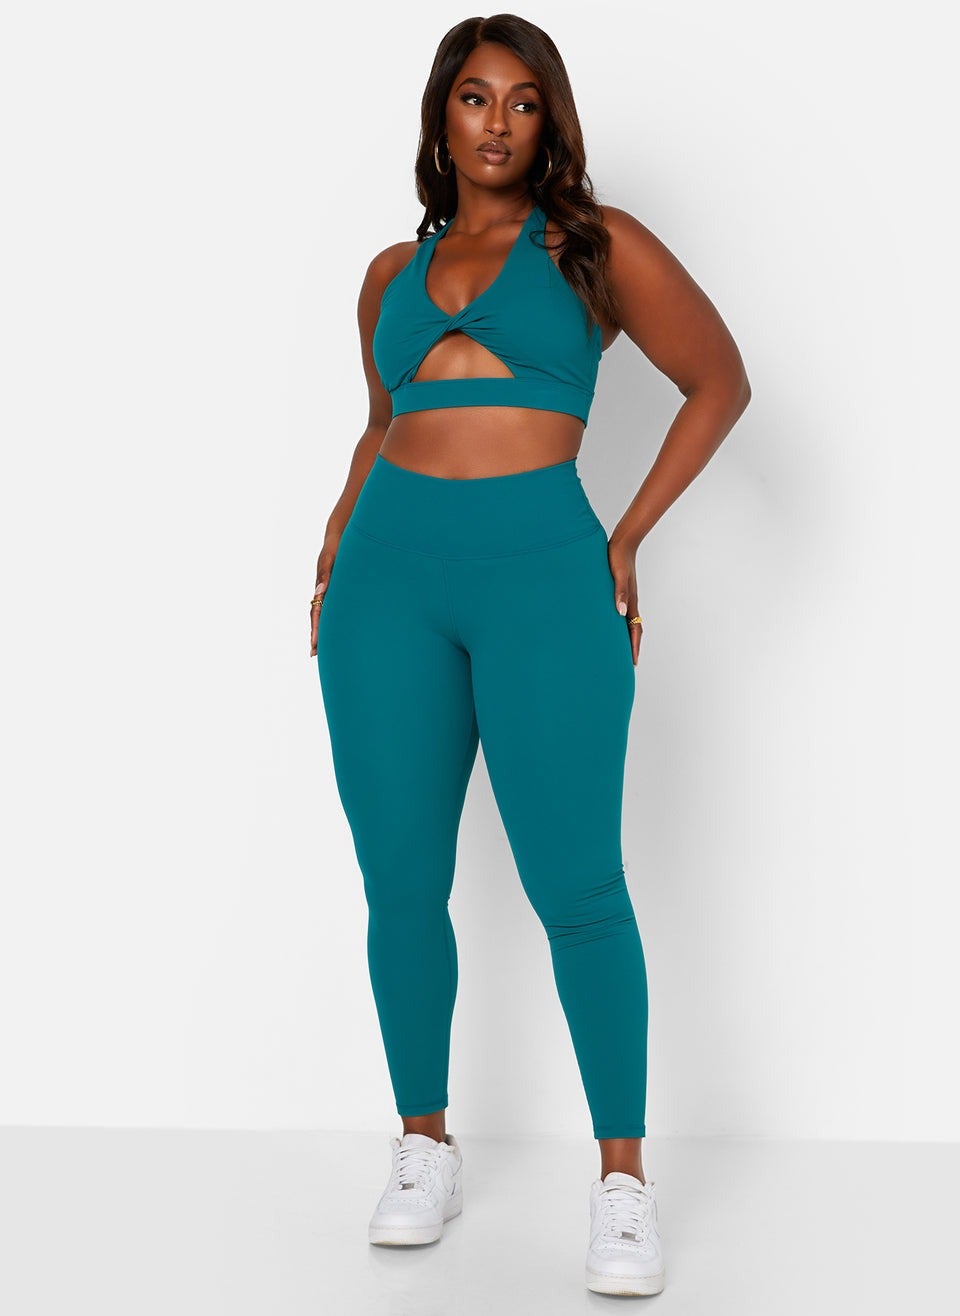 Love It or Leave It Activewear Finds